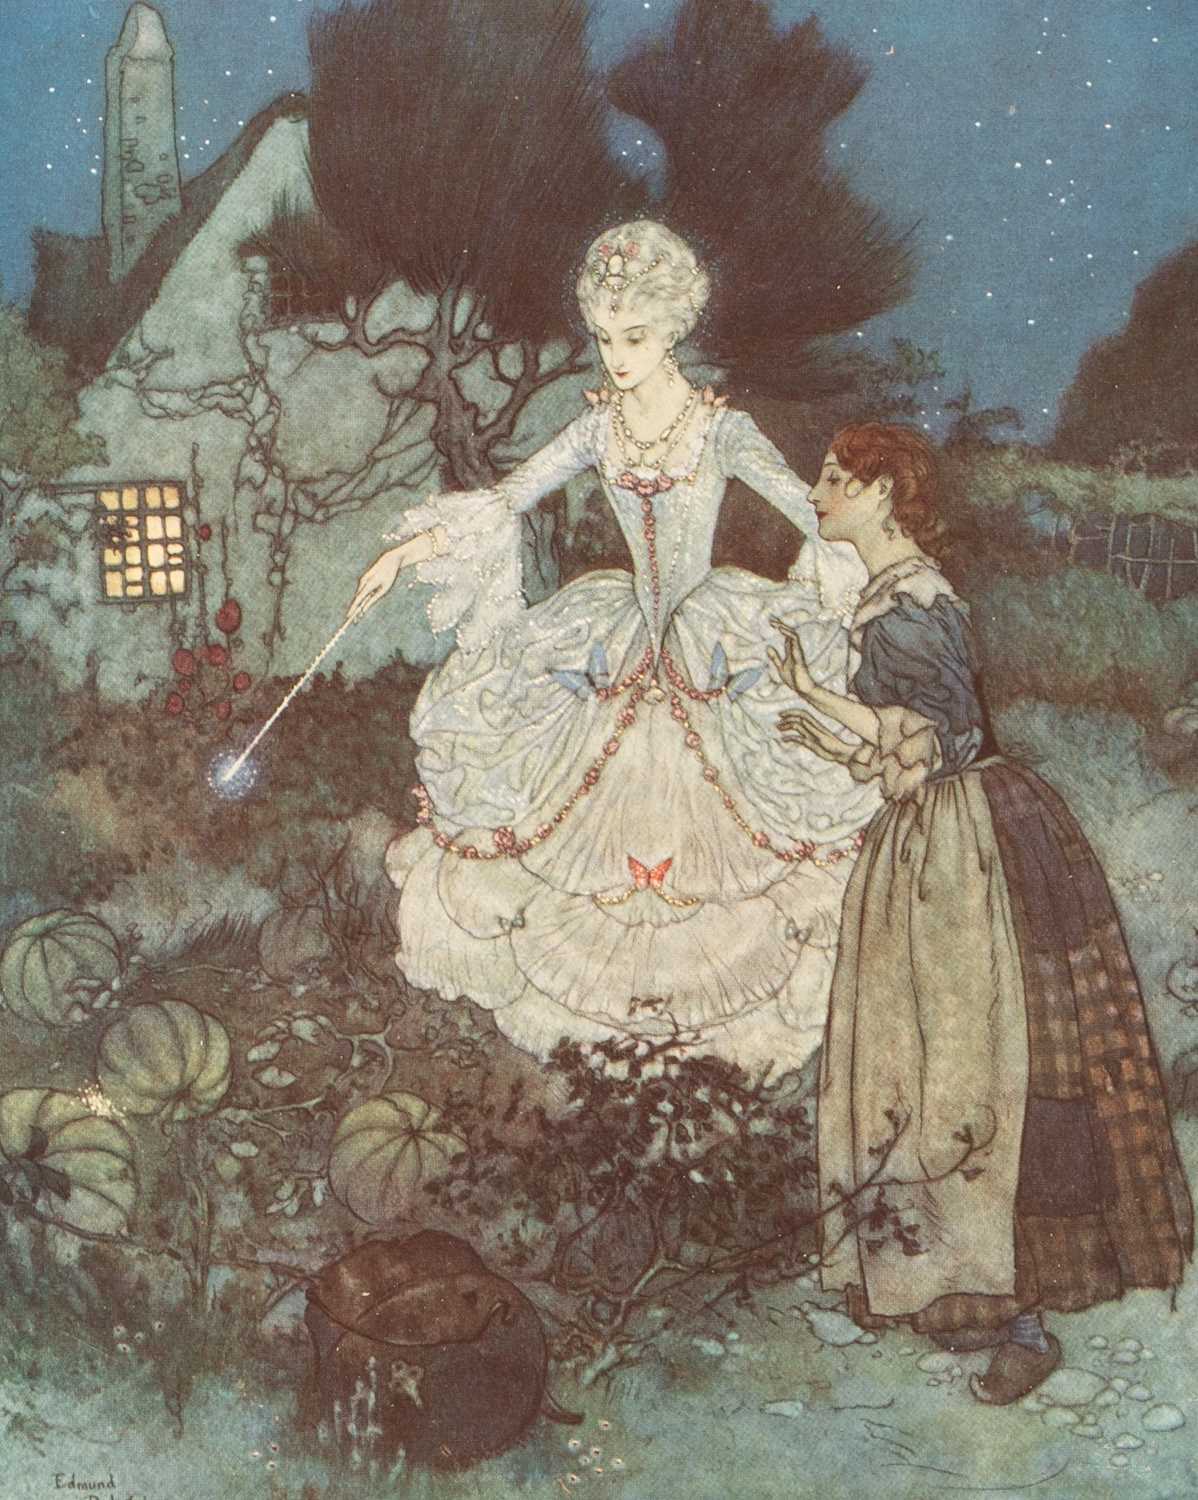 Quiller-Couch (Sir Arthur) The Sleeping Beauty and other fairy tales - Image 17 of 37